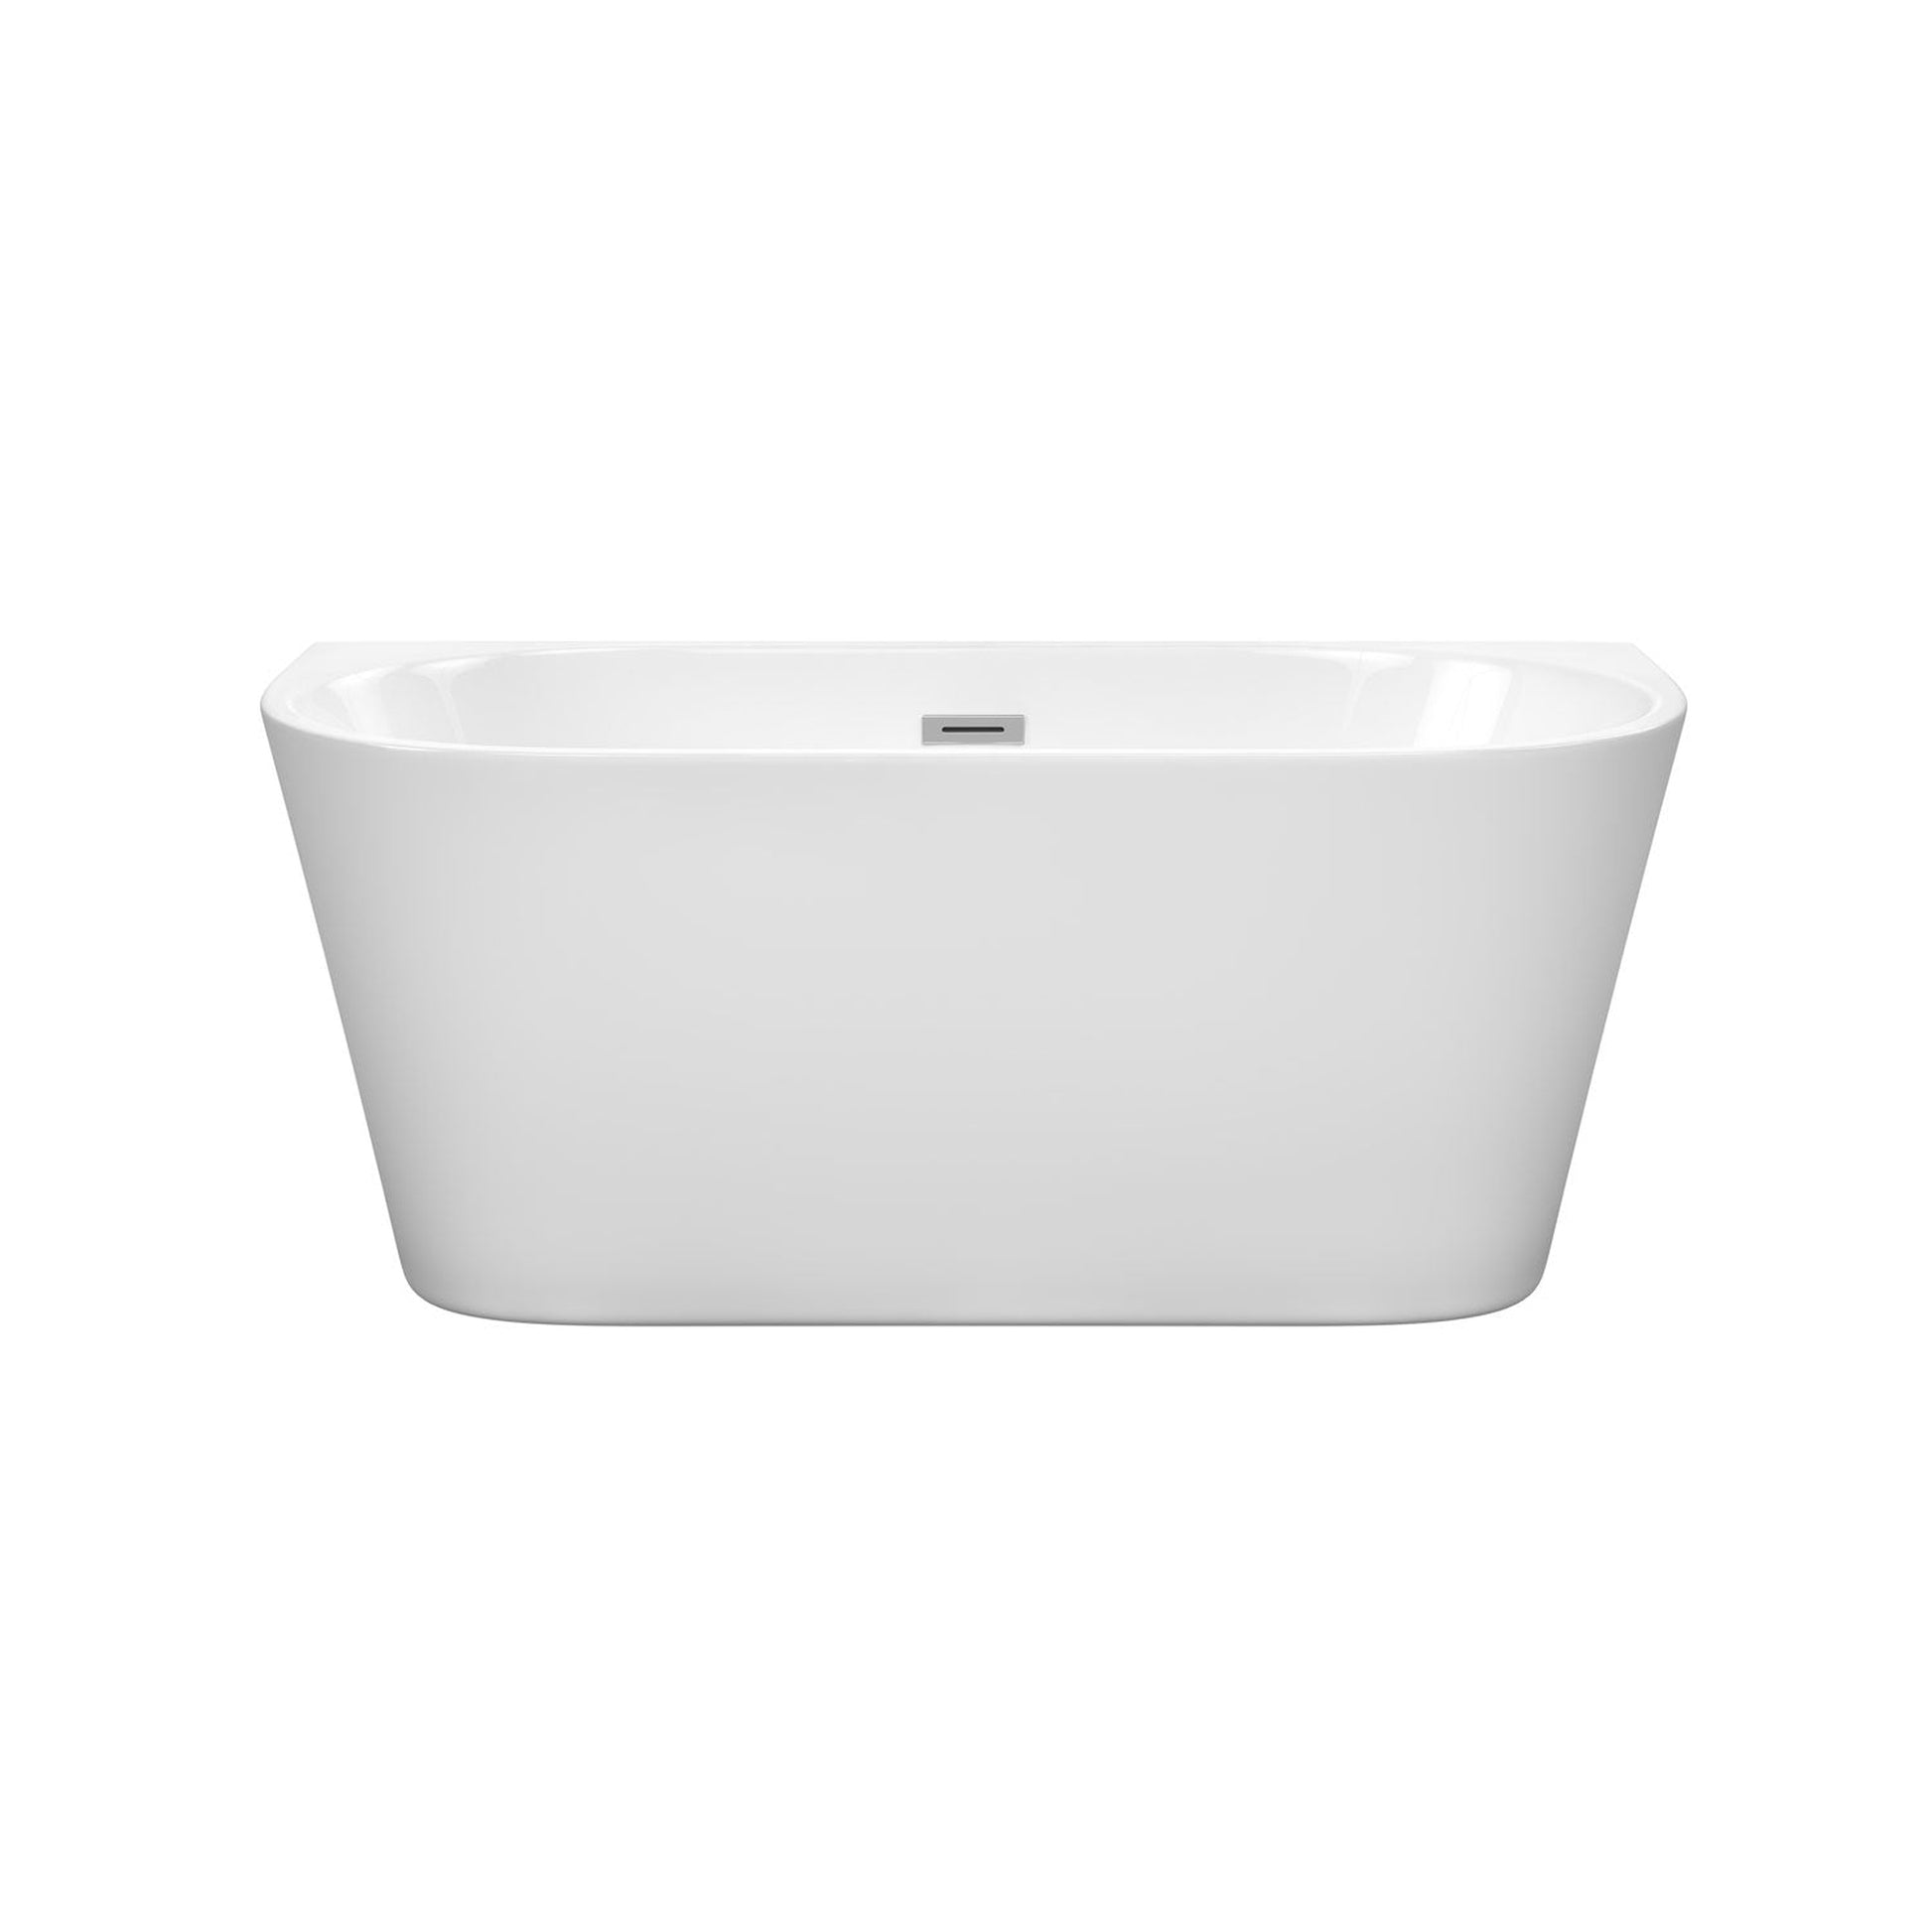 Wyndham Collection Callie 59" Freestanding Bathtub in White With Polished Chrome Drain and Overflow Trim